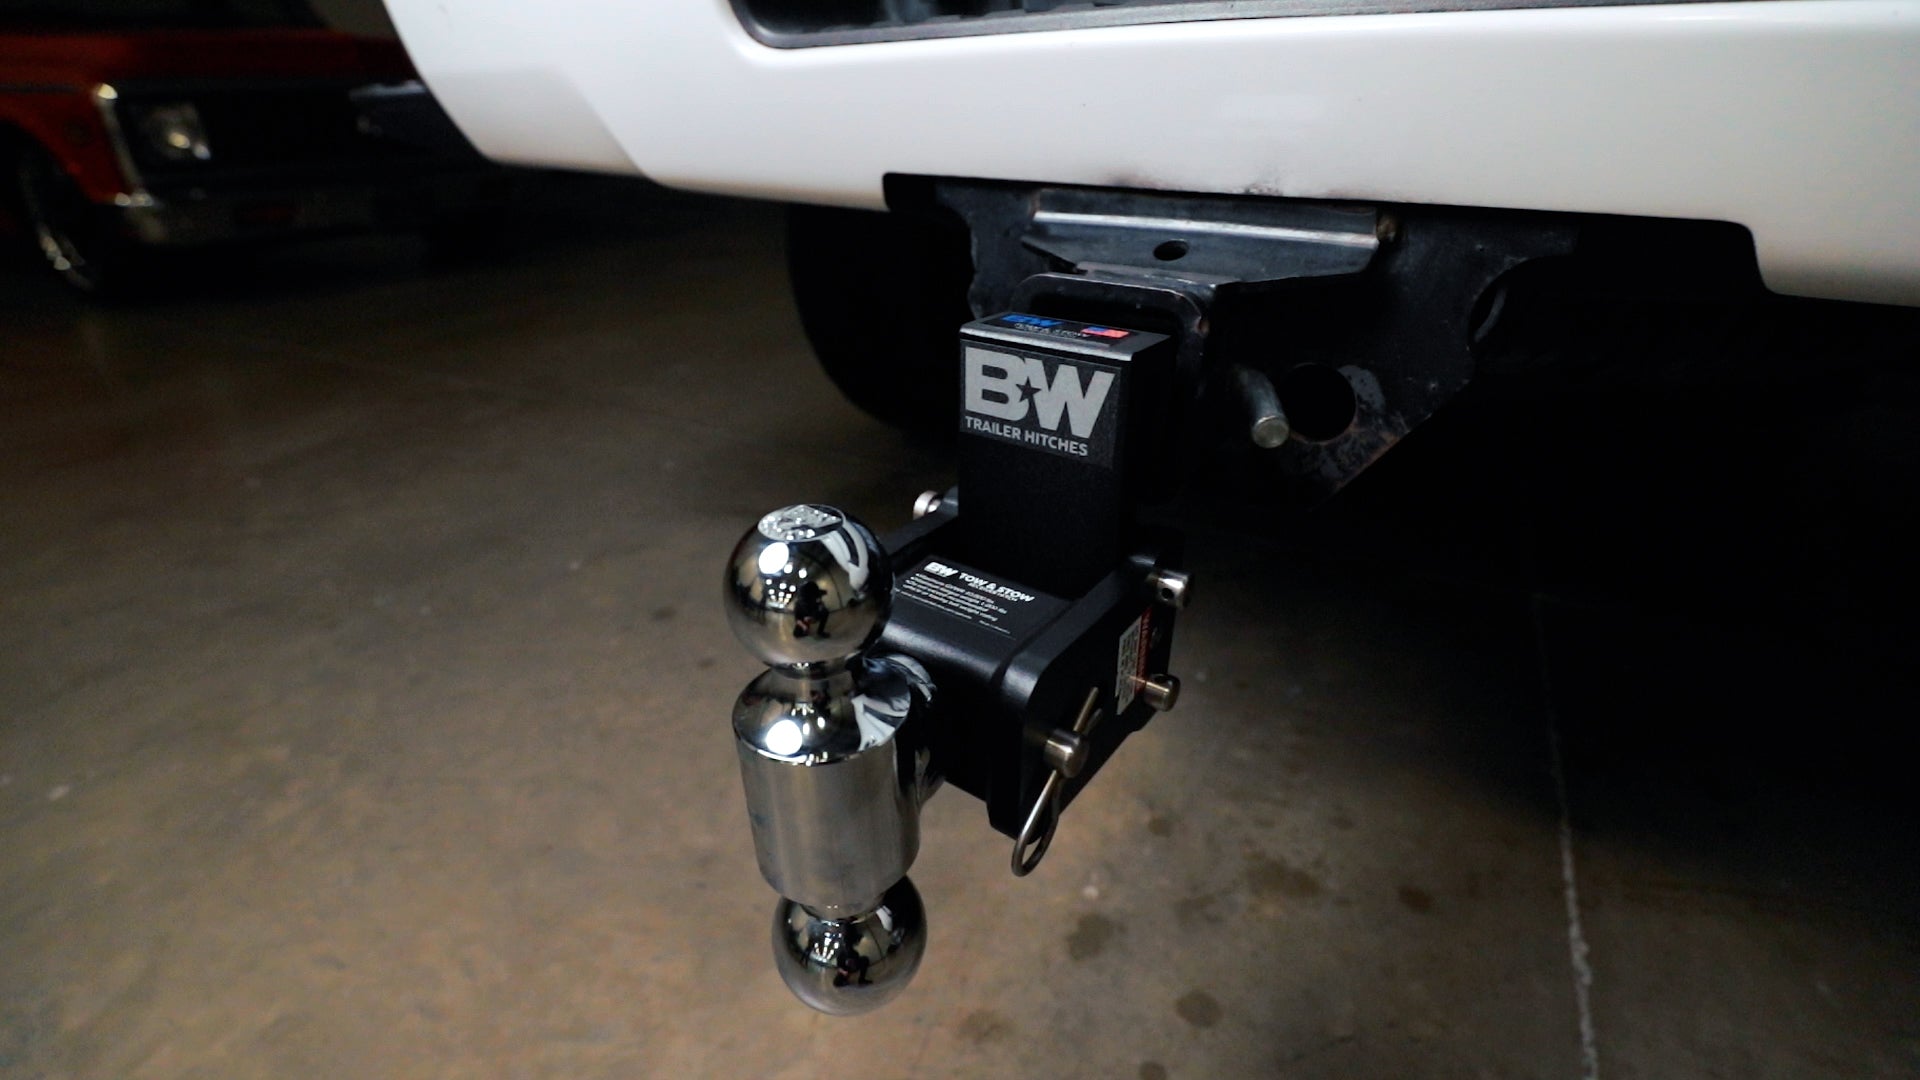 B&W TOW & STOW ADJUSTABLE BALL MOUNT